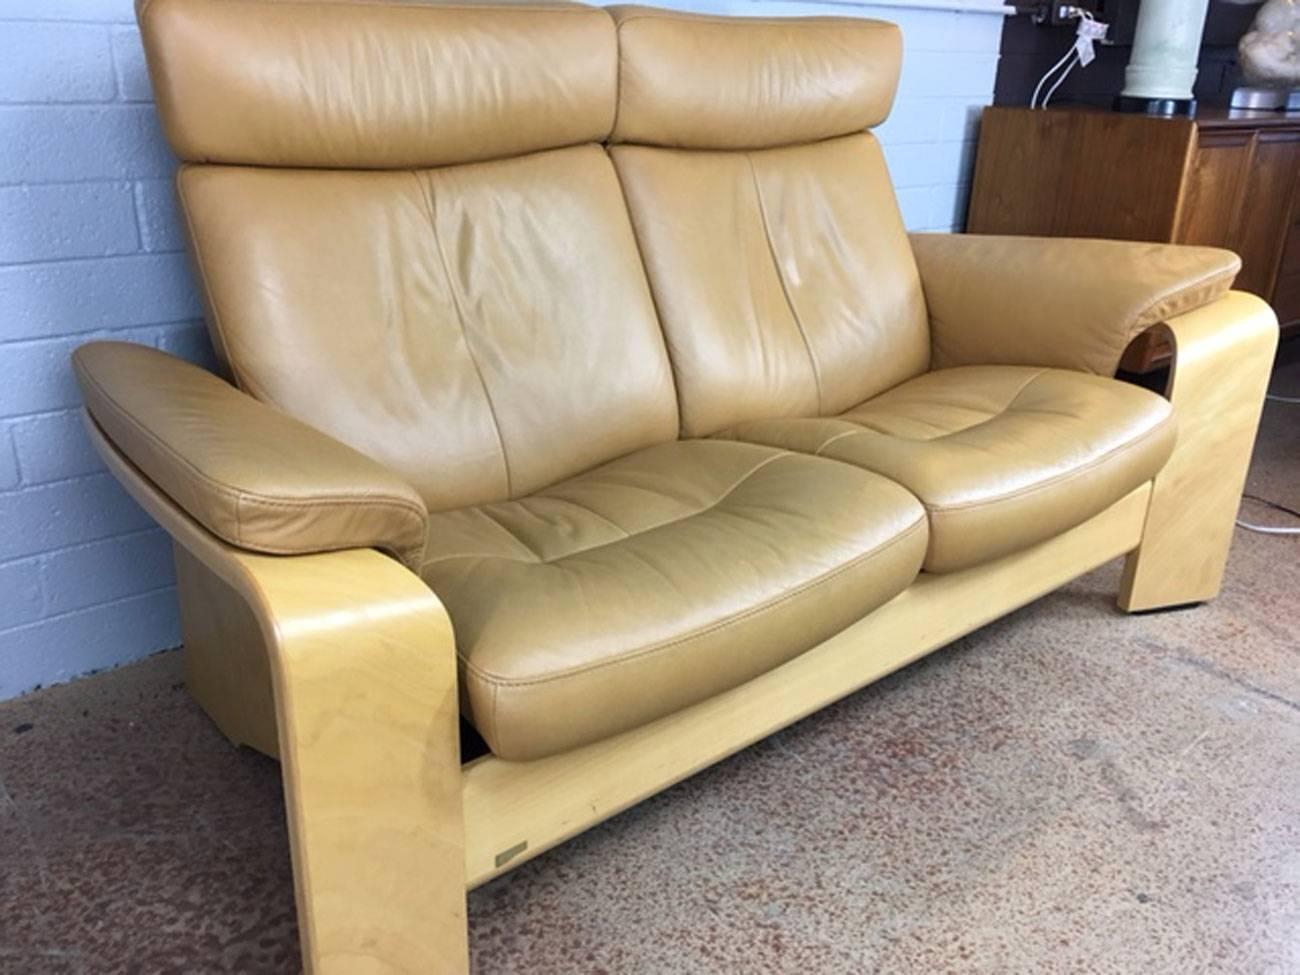 Superb leather reclining sofa from the stressless line from Ekornes. Leather is in excellent condition. No rips, tears, spots, or visible wear.